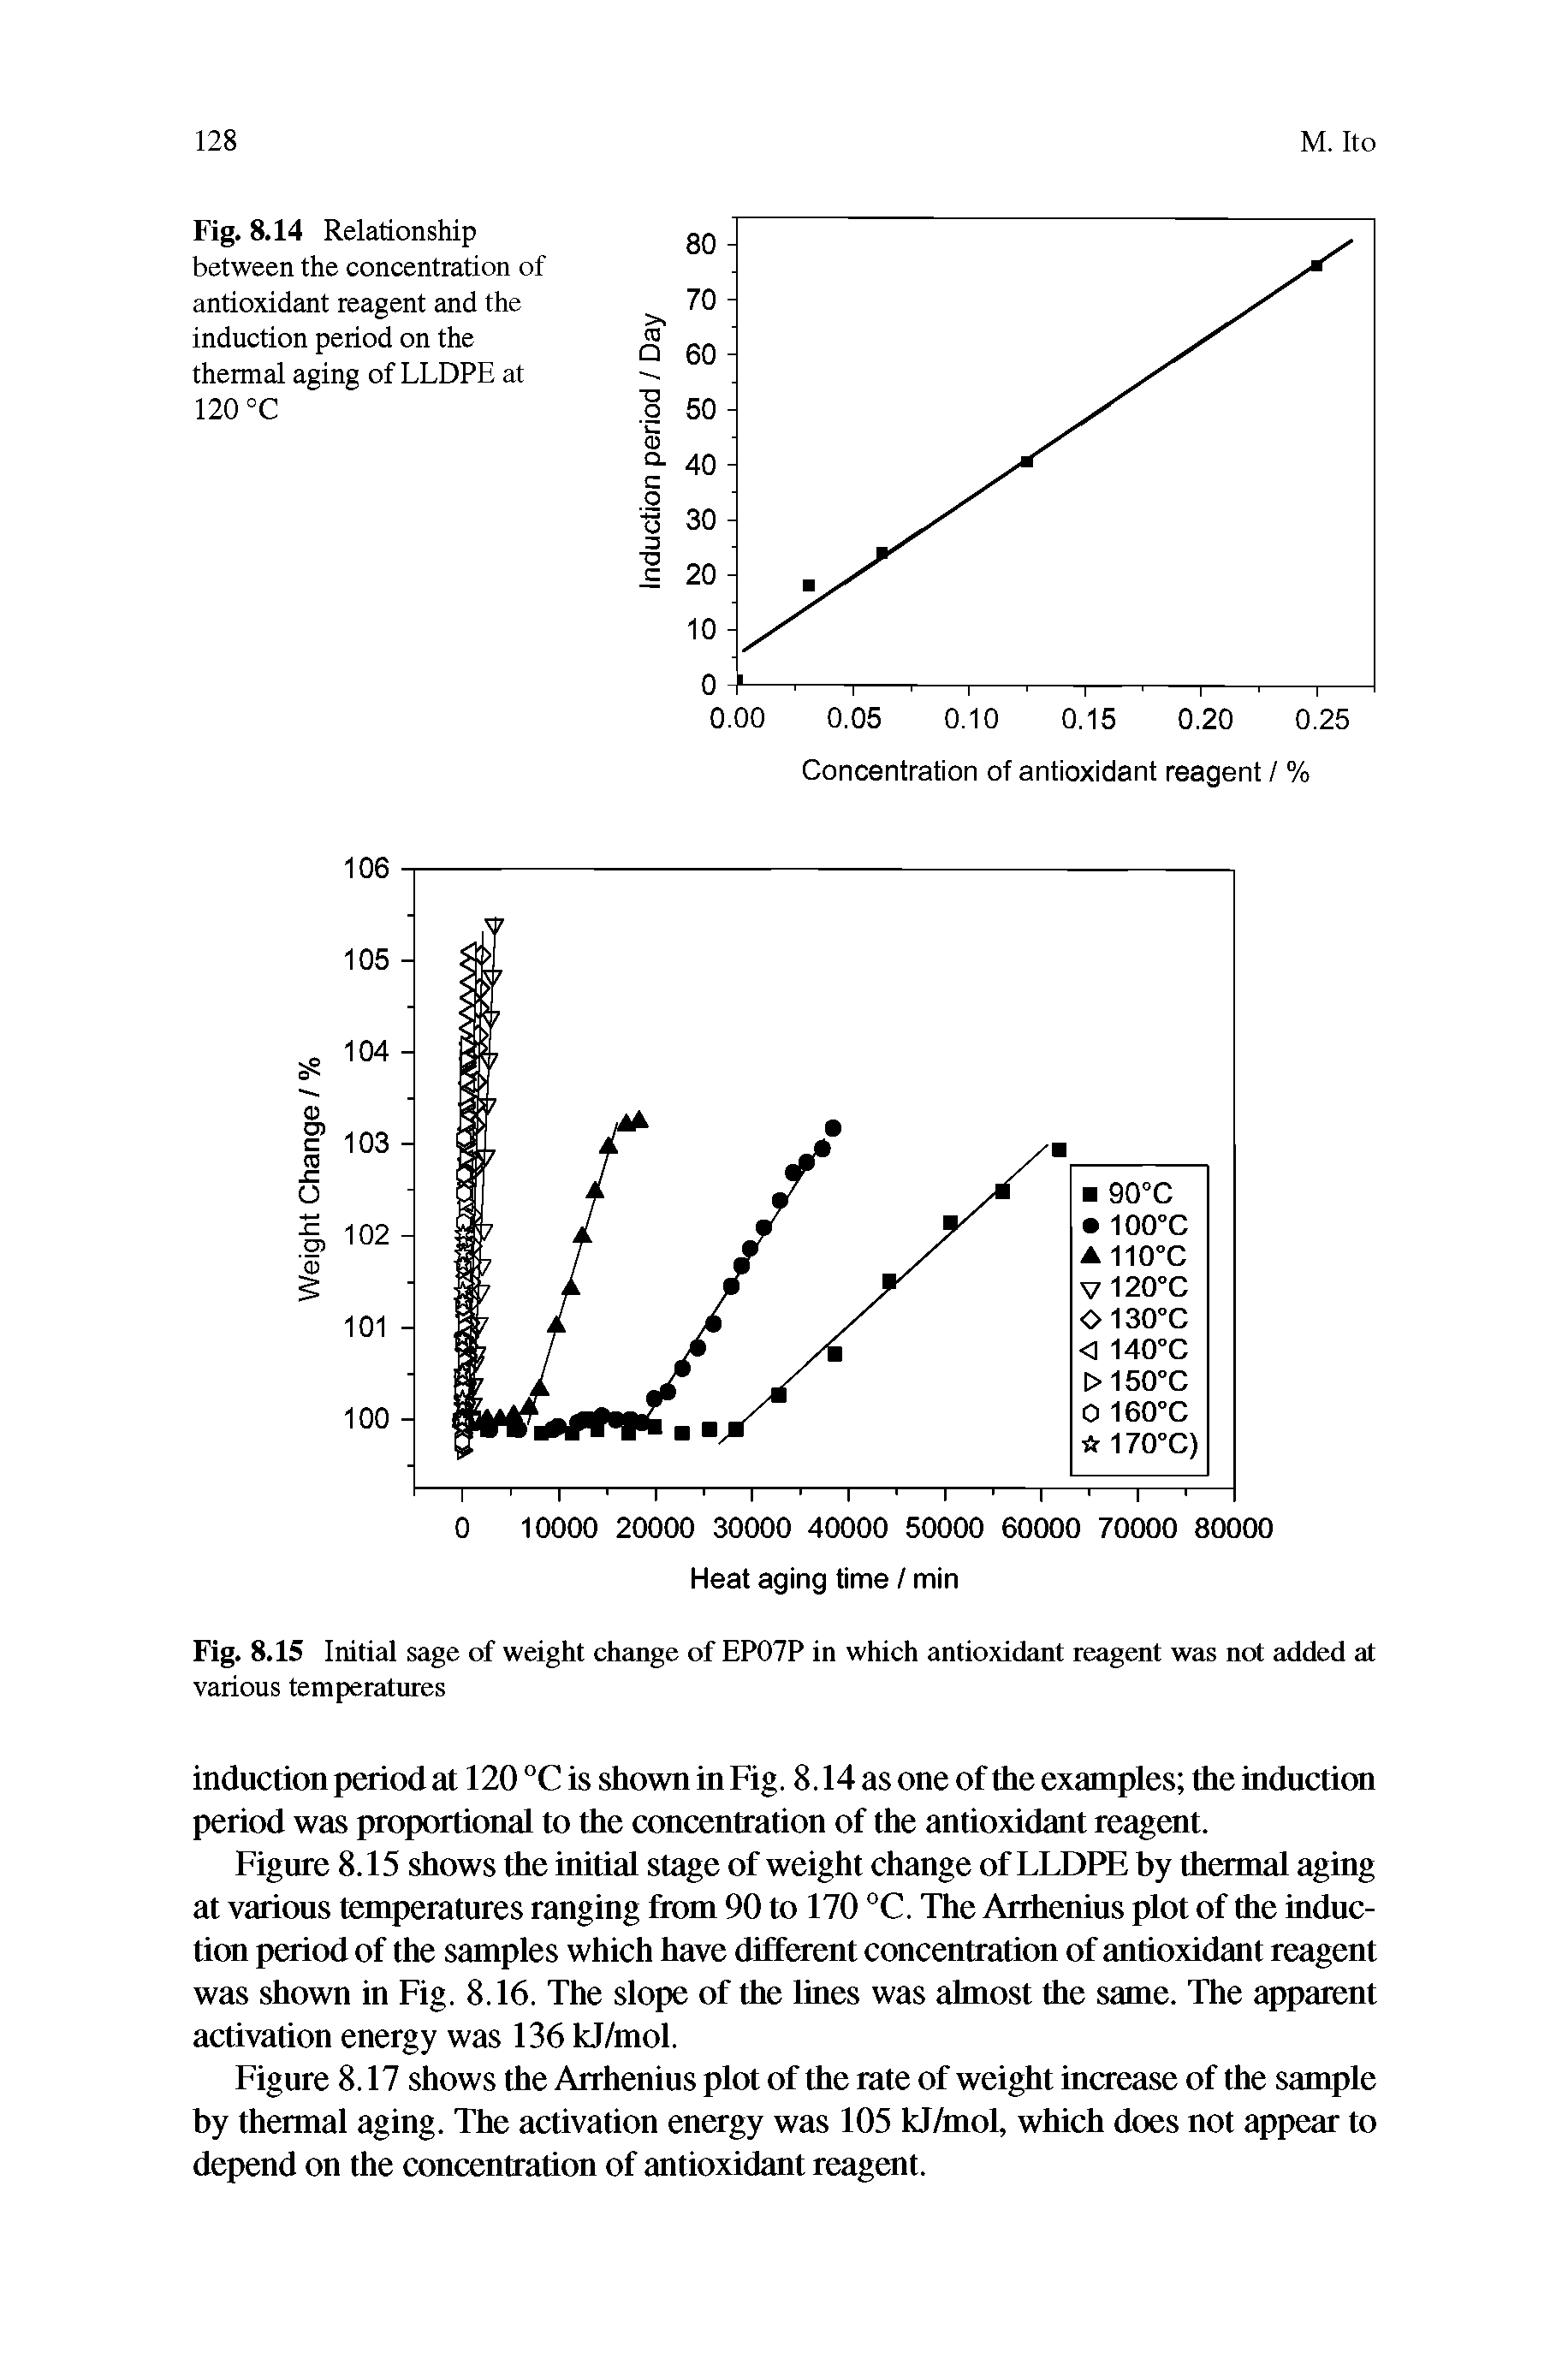 Figure 8.15 shows the initial stage of weight change of LLDPE by thermal aging at varions temperatures ranging from 90 to 170 °C. The Anhenius plot of the induction period of the samples which have different concentration of antioxidant reagent was shown in Fig. 8.16. The slope of the lines was almost the same. The apparent activation energy was 136 kJ/mol.